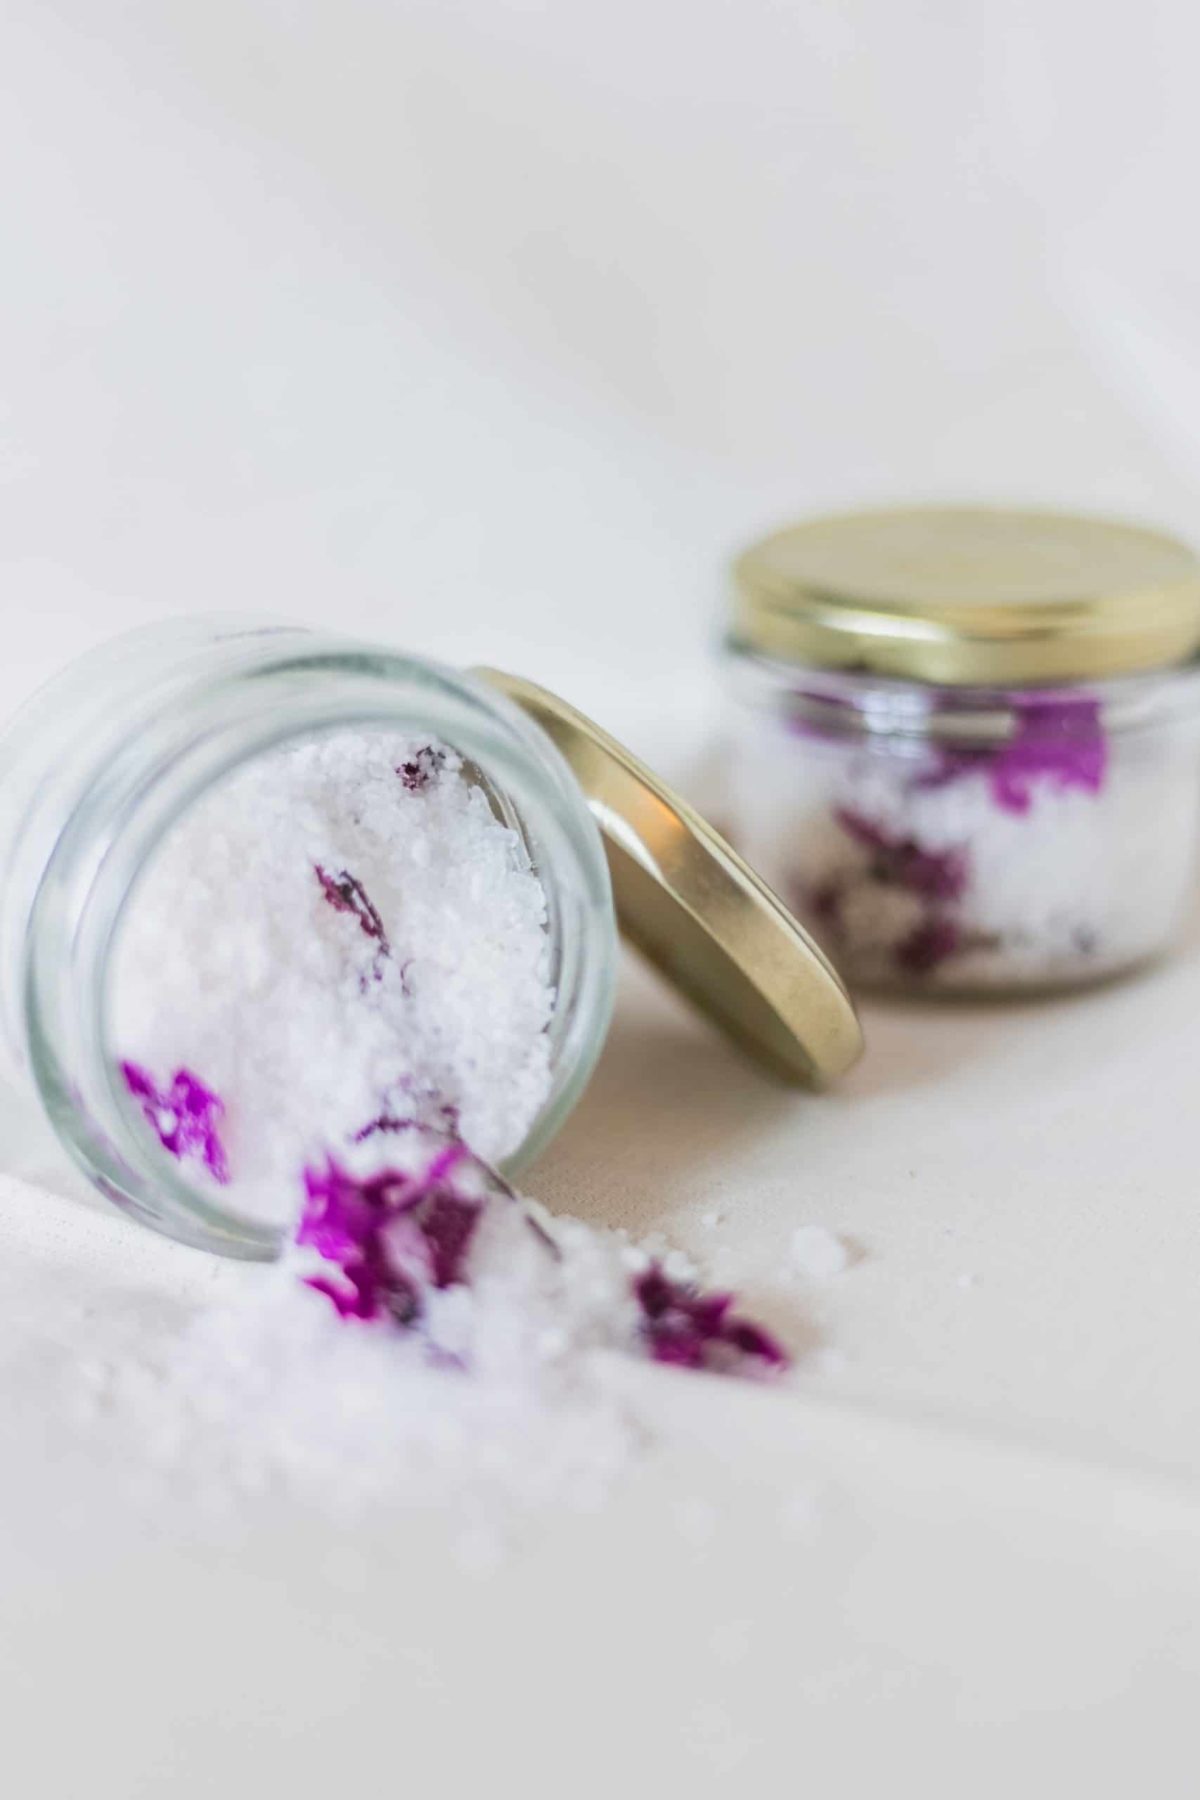 overtunred jar of bath salts containing salts and purple petals